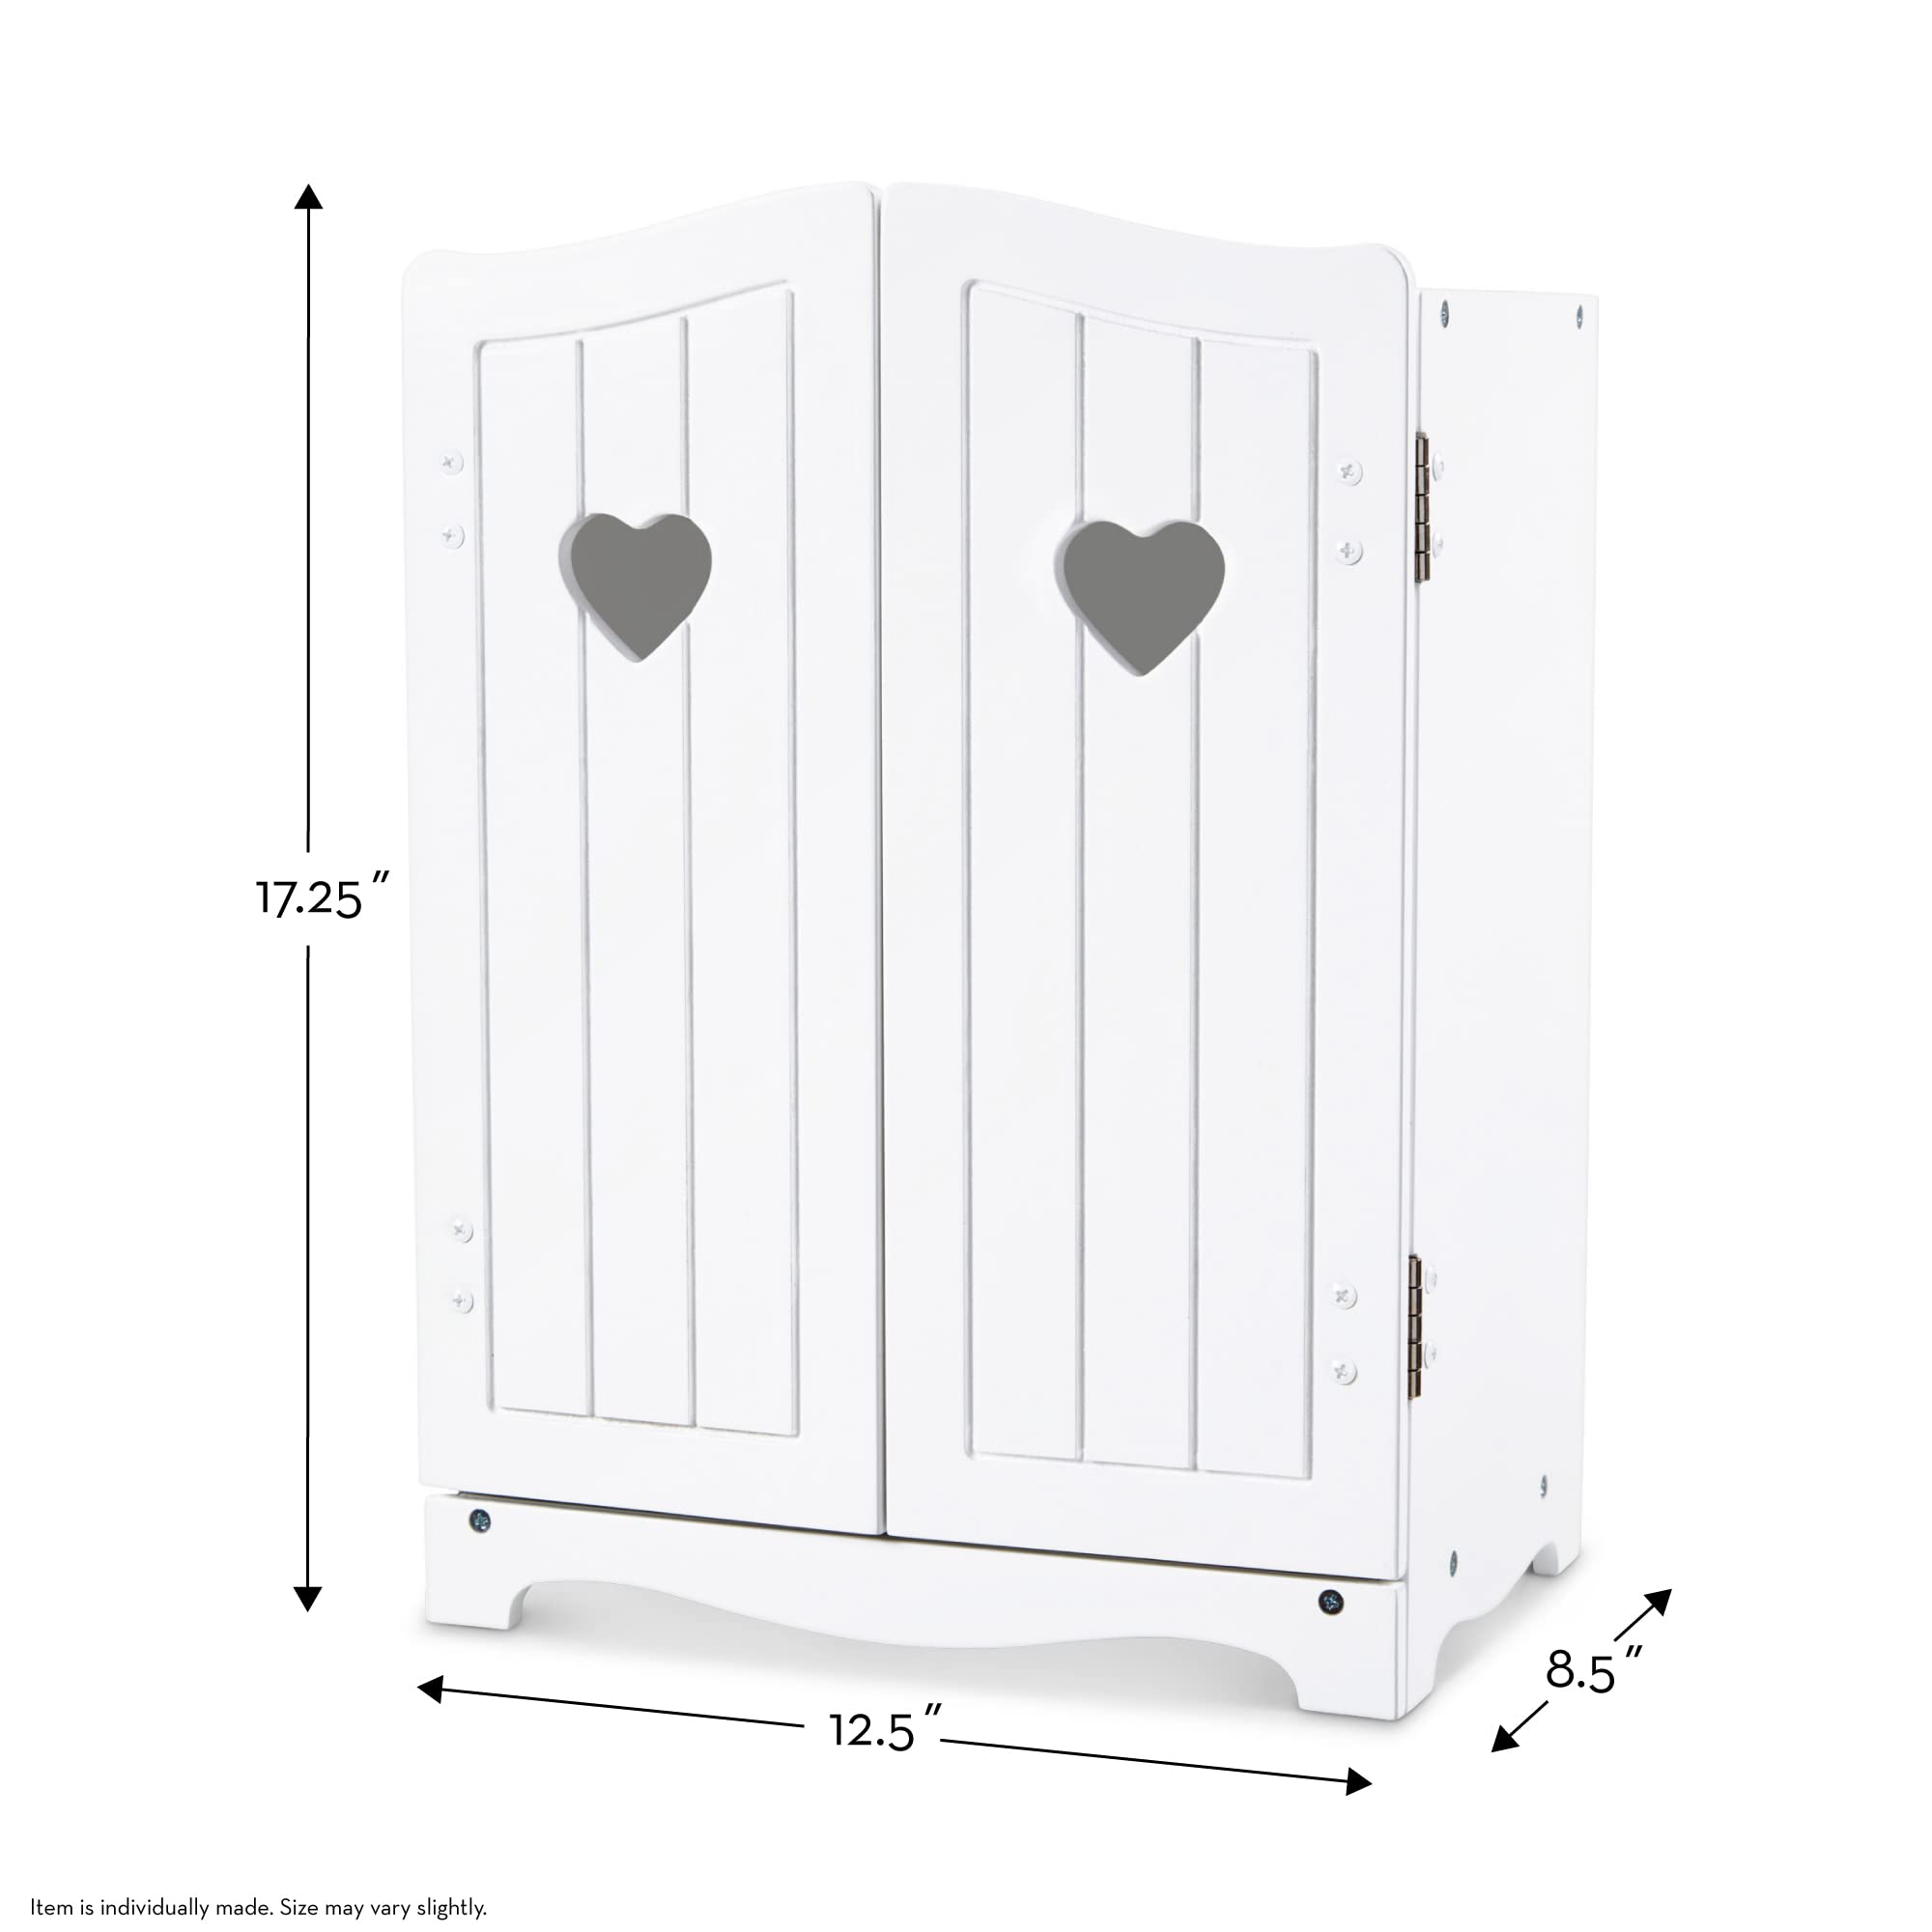 Melissa & Doug Mine to Love Wooden Play Armoire Closet for Dolls, Stuffed Animals - White (17.3”H x 12.4”W x 8.5”D Assembled) - Wooden Pretend Play Closet, Doll Wardrobe